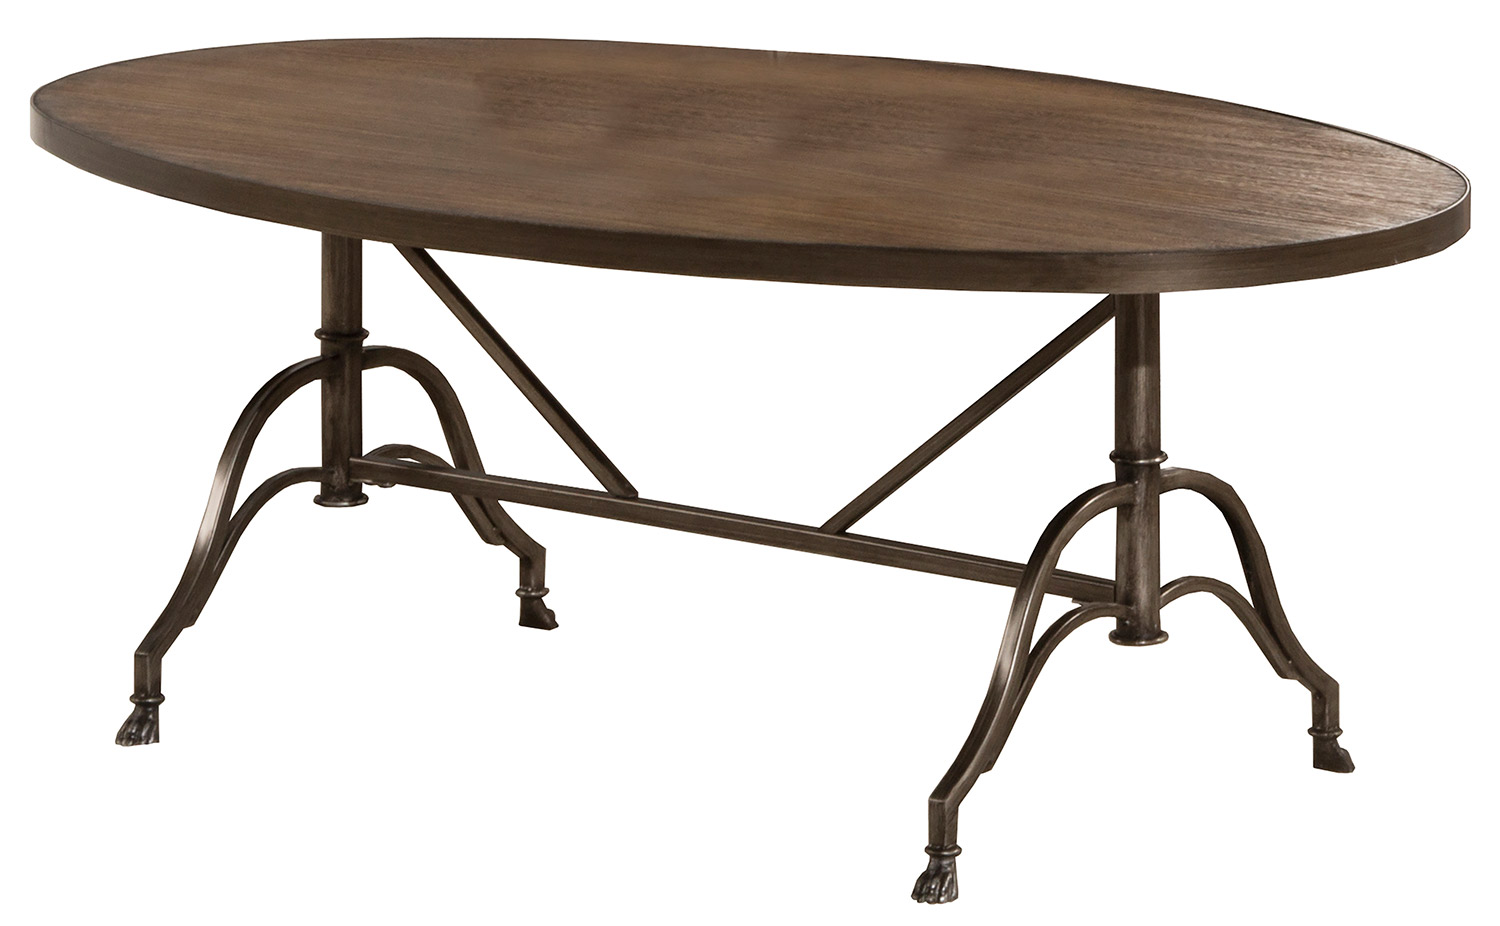 Hillsdale Clairview Oval Coffee Table - Brown/Gray